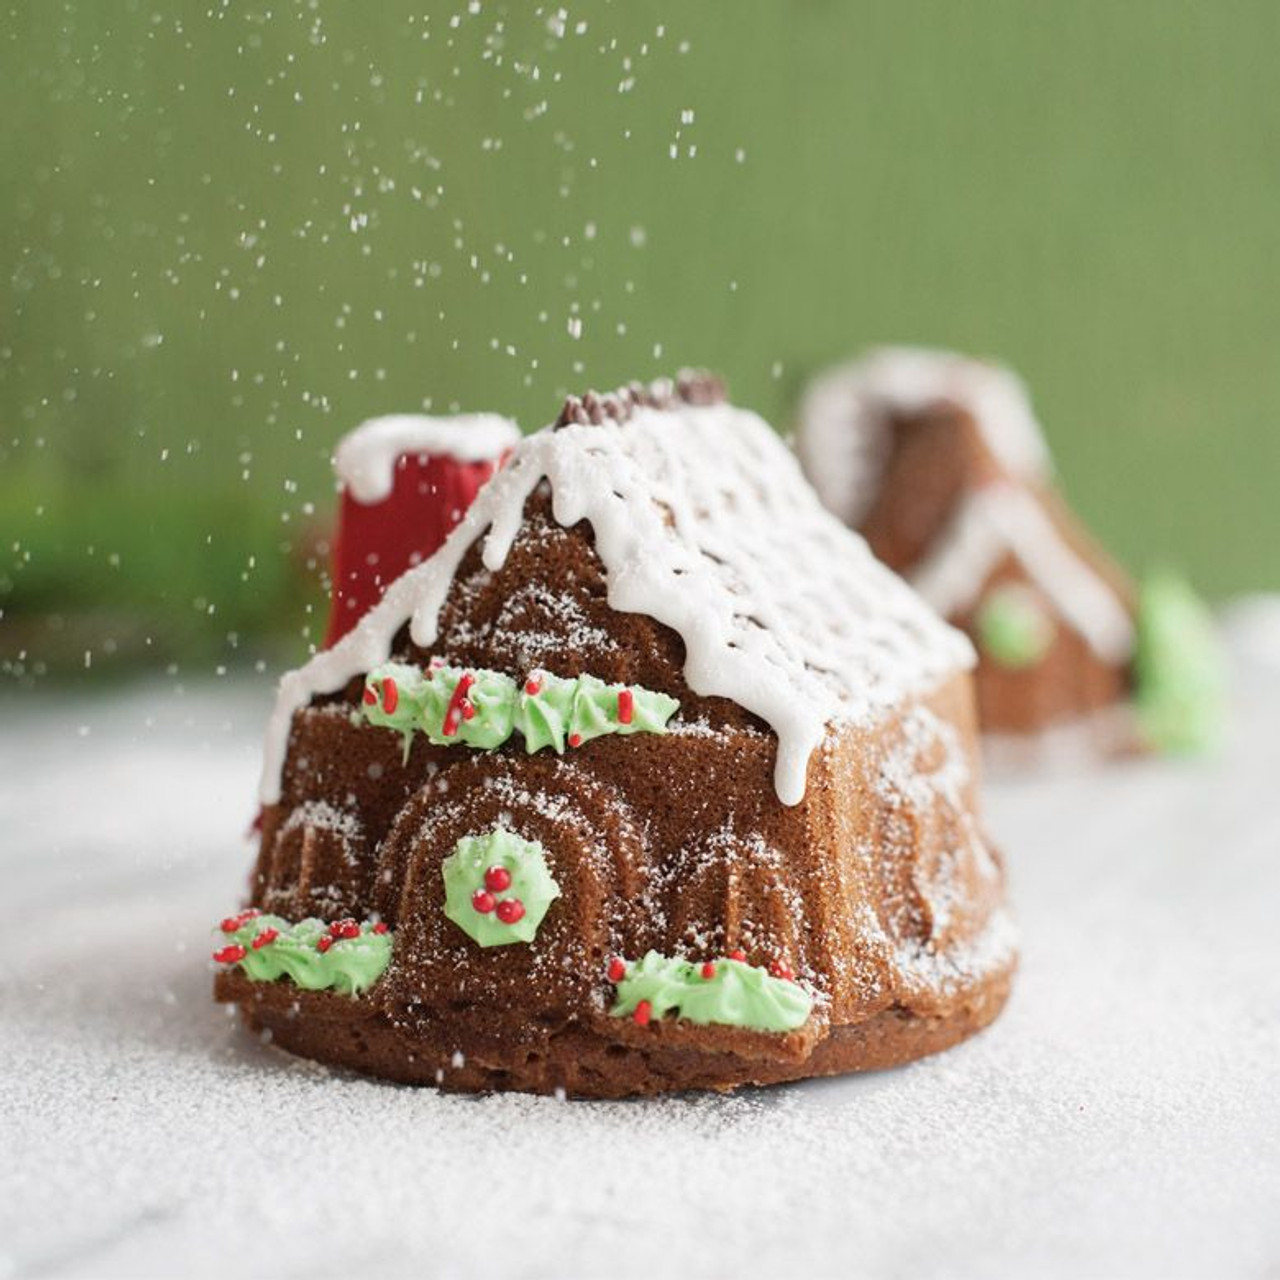 https://cdn11.bigcommerce.com/s-hccytny0od/images/stencil/1280x1280/products/2051/6730/nordic-ware-gingerbread-house-duet-pan-1__76853.1538057525.jpg?c=2?imbypass=on